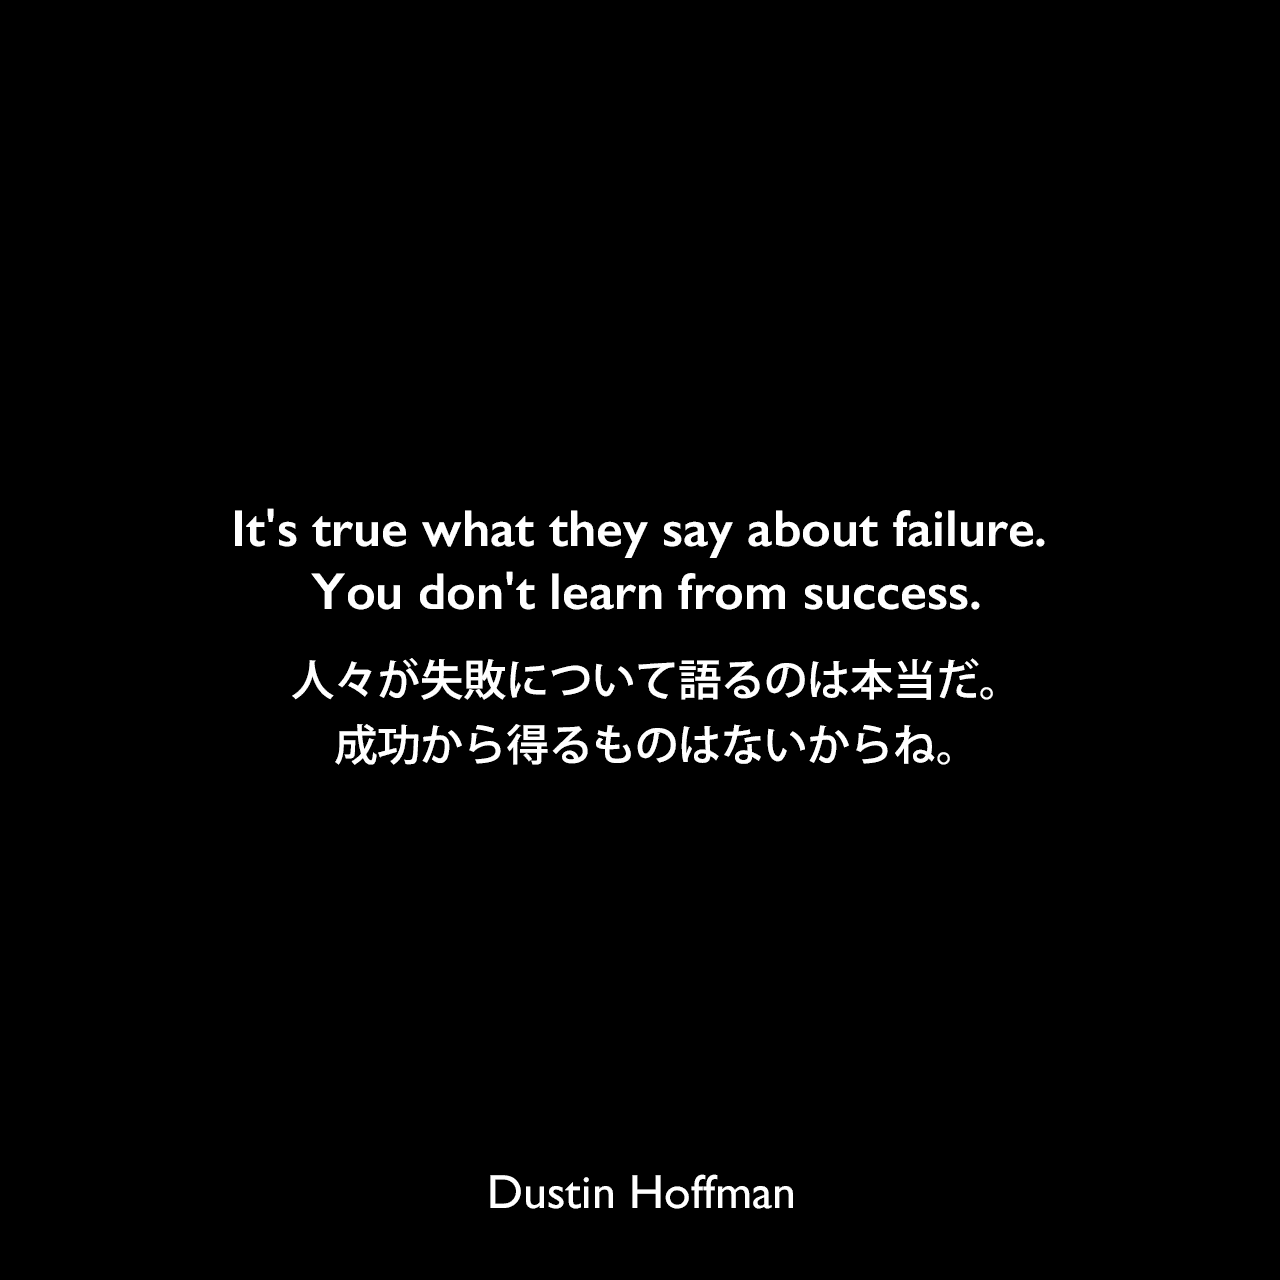 It’s true what they say about failure. You don’t learn from success.人々が失敗について語るのは本当だ。成功から得るものはないからね。